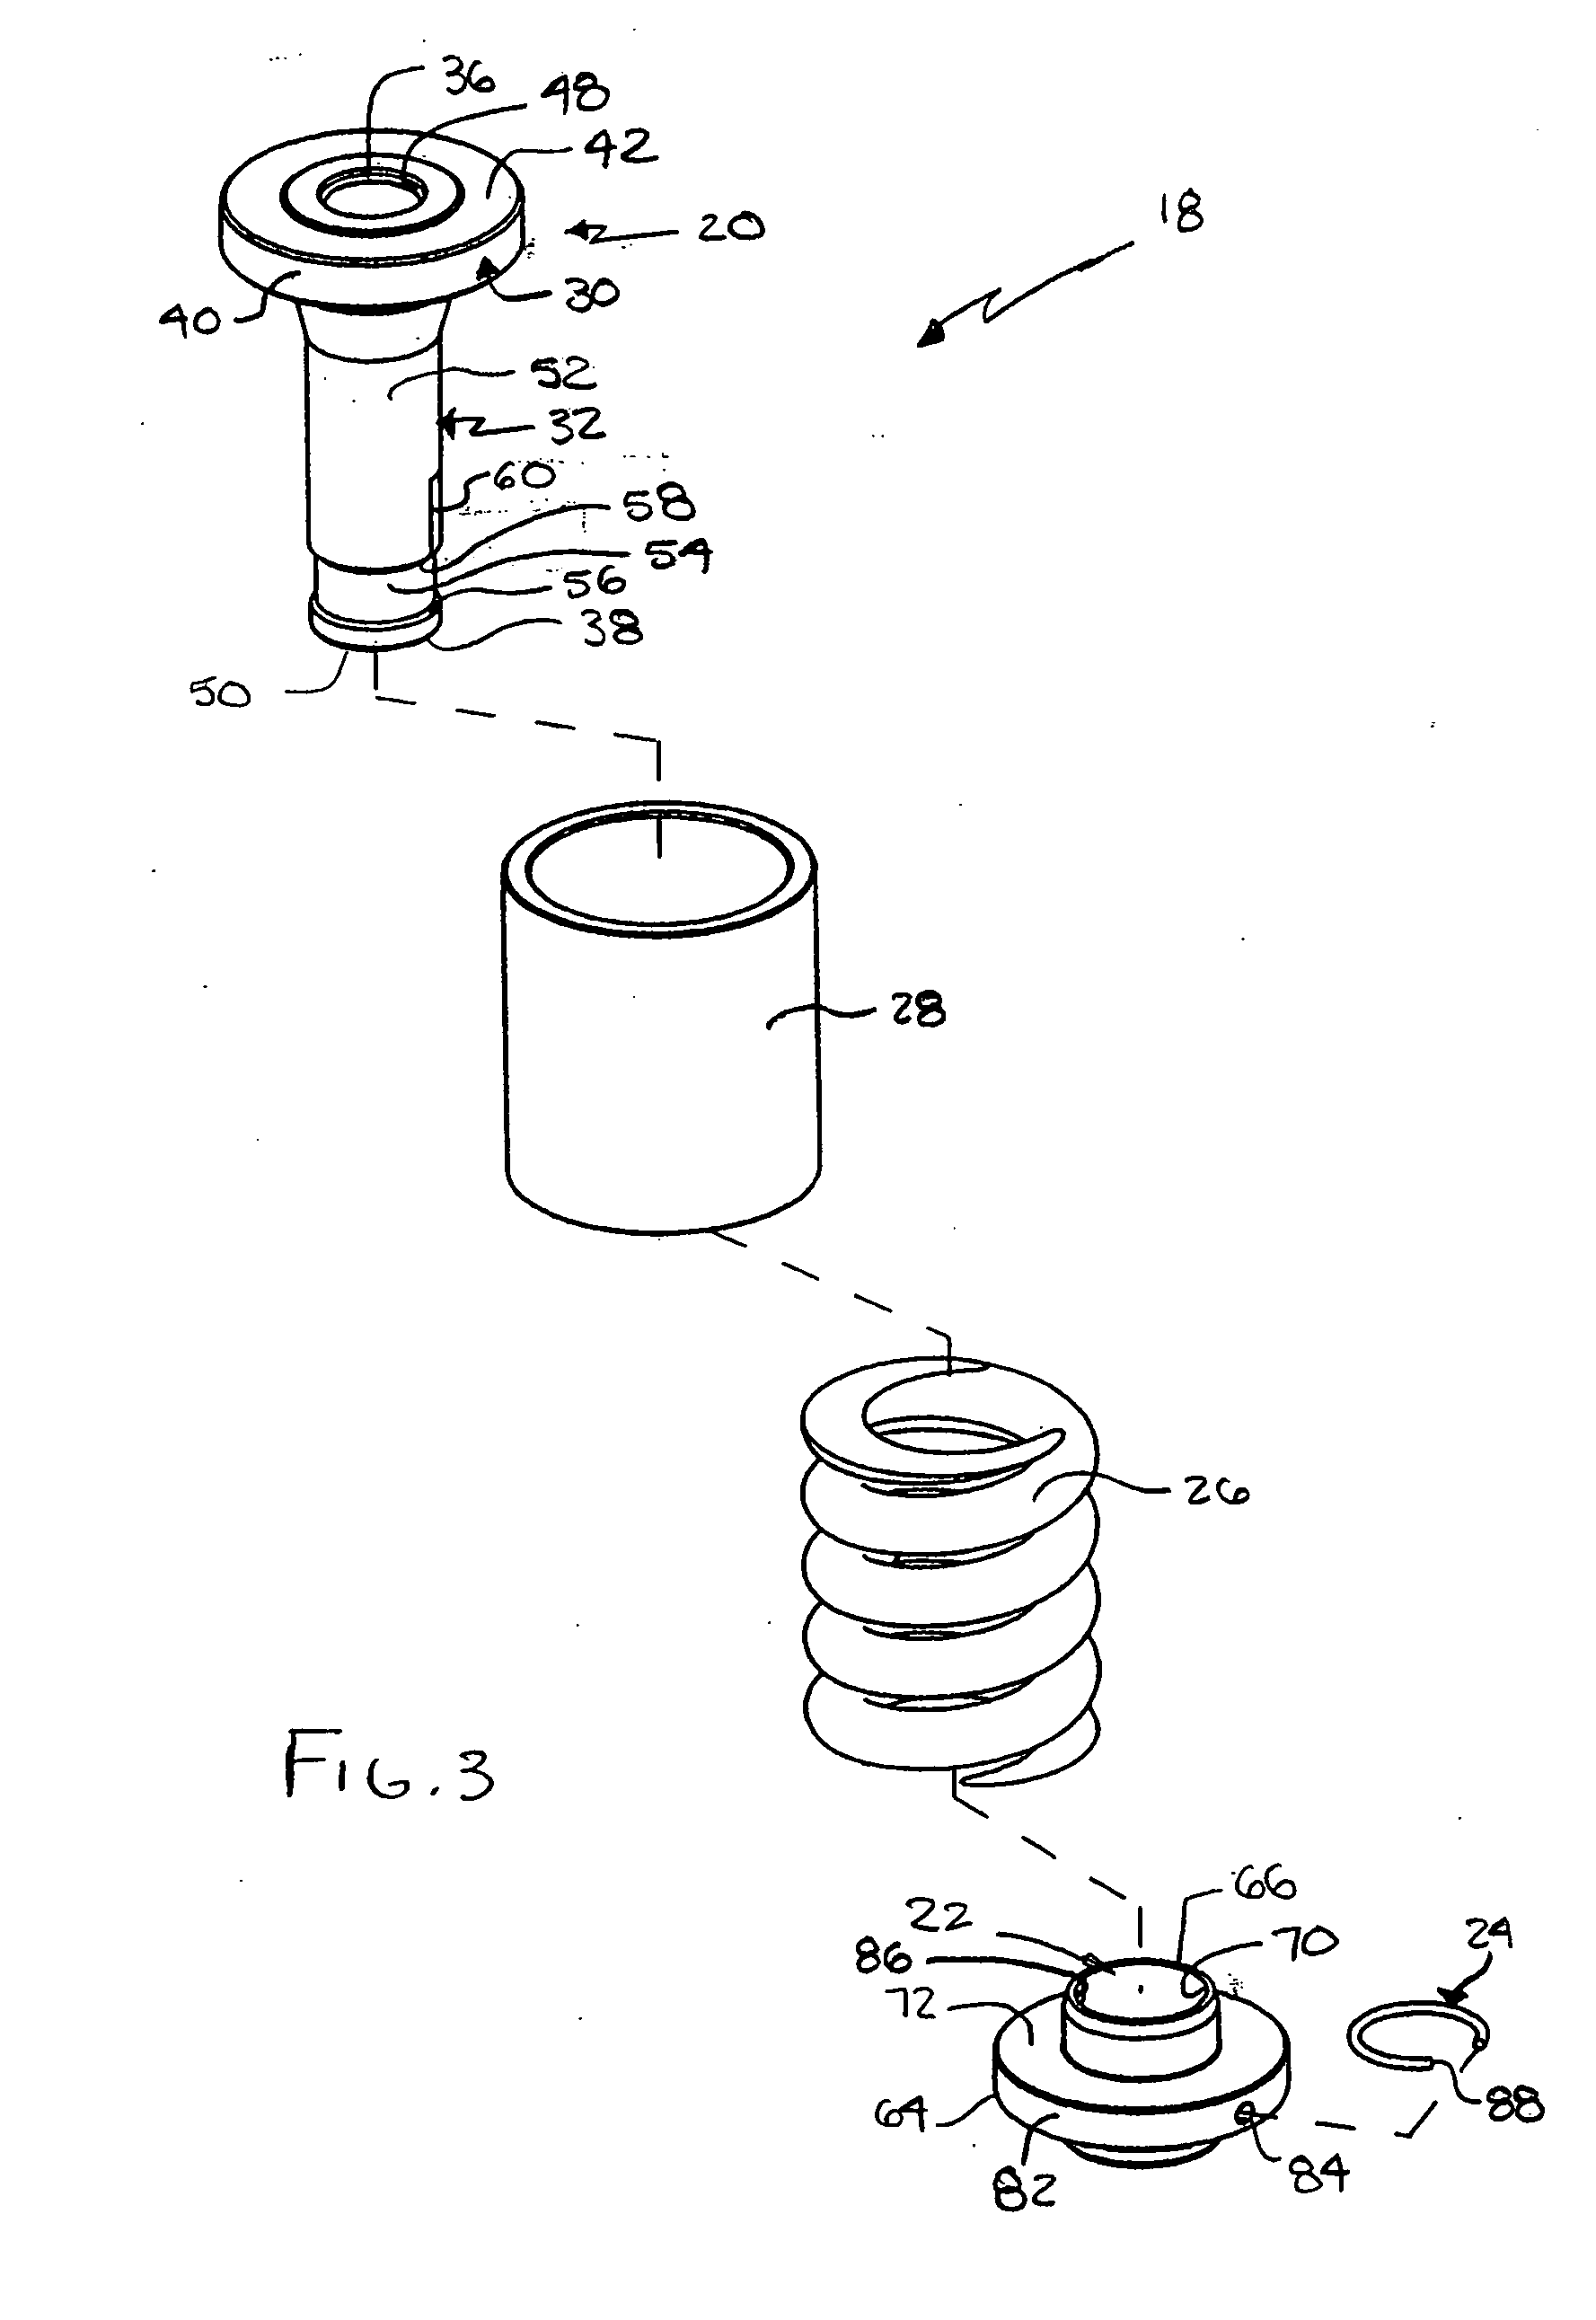 Biasing assembly for a punching device